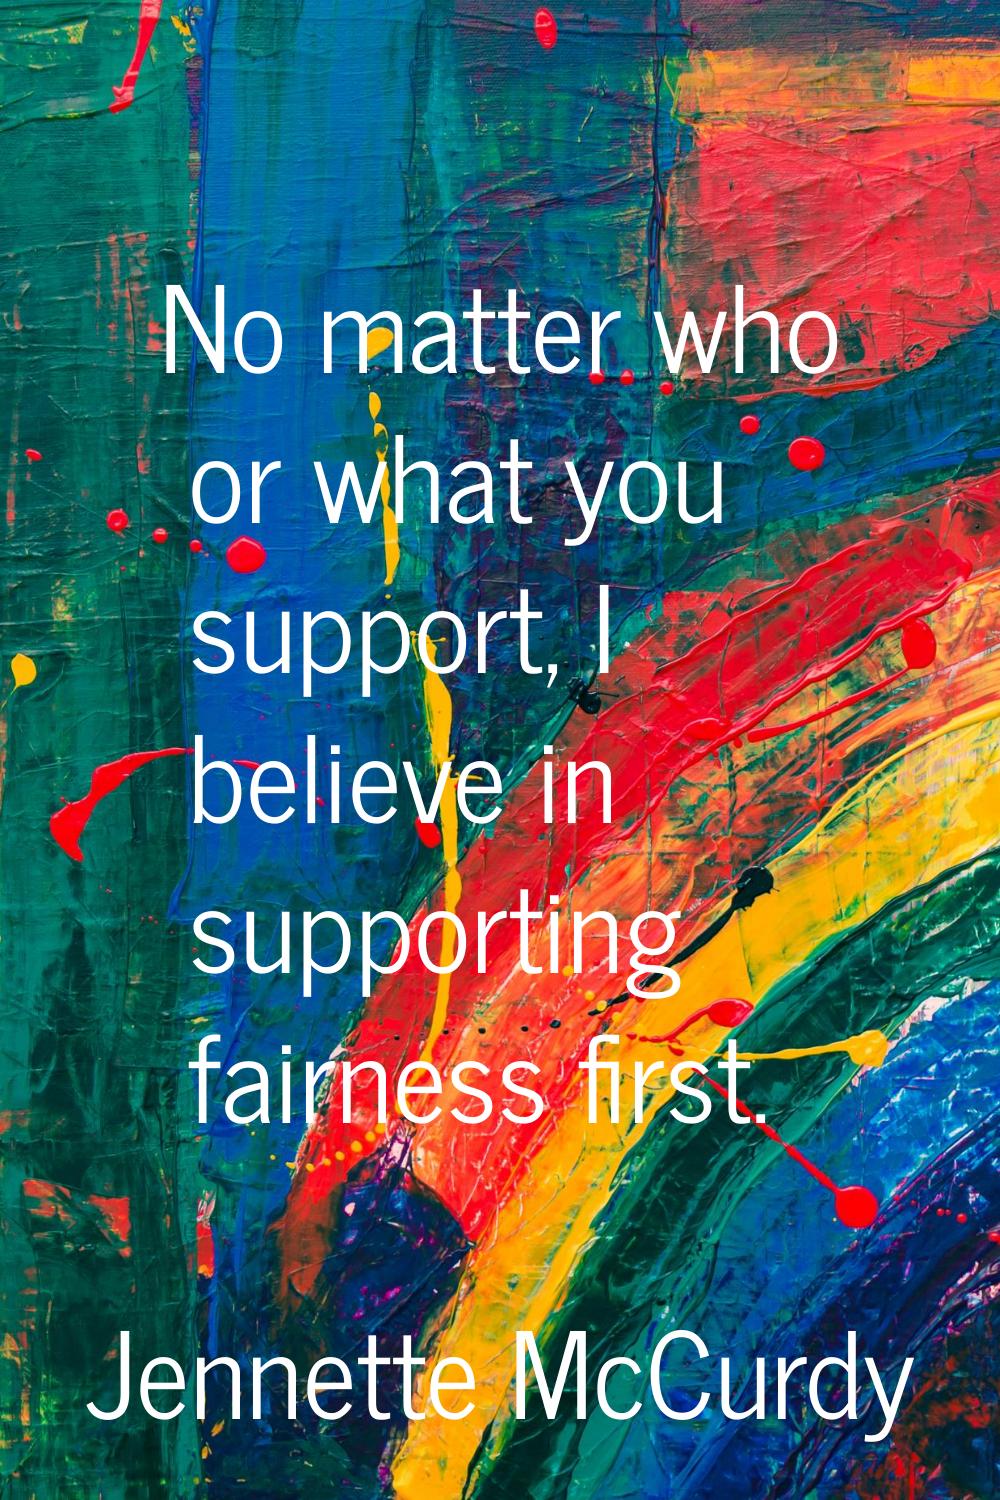 No matter who or what you support, I believe in supporting fairness first.